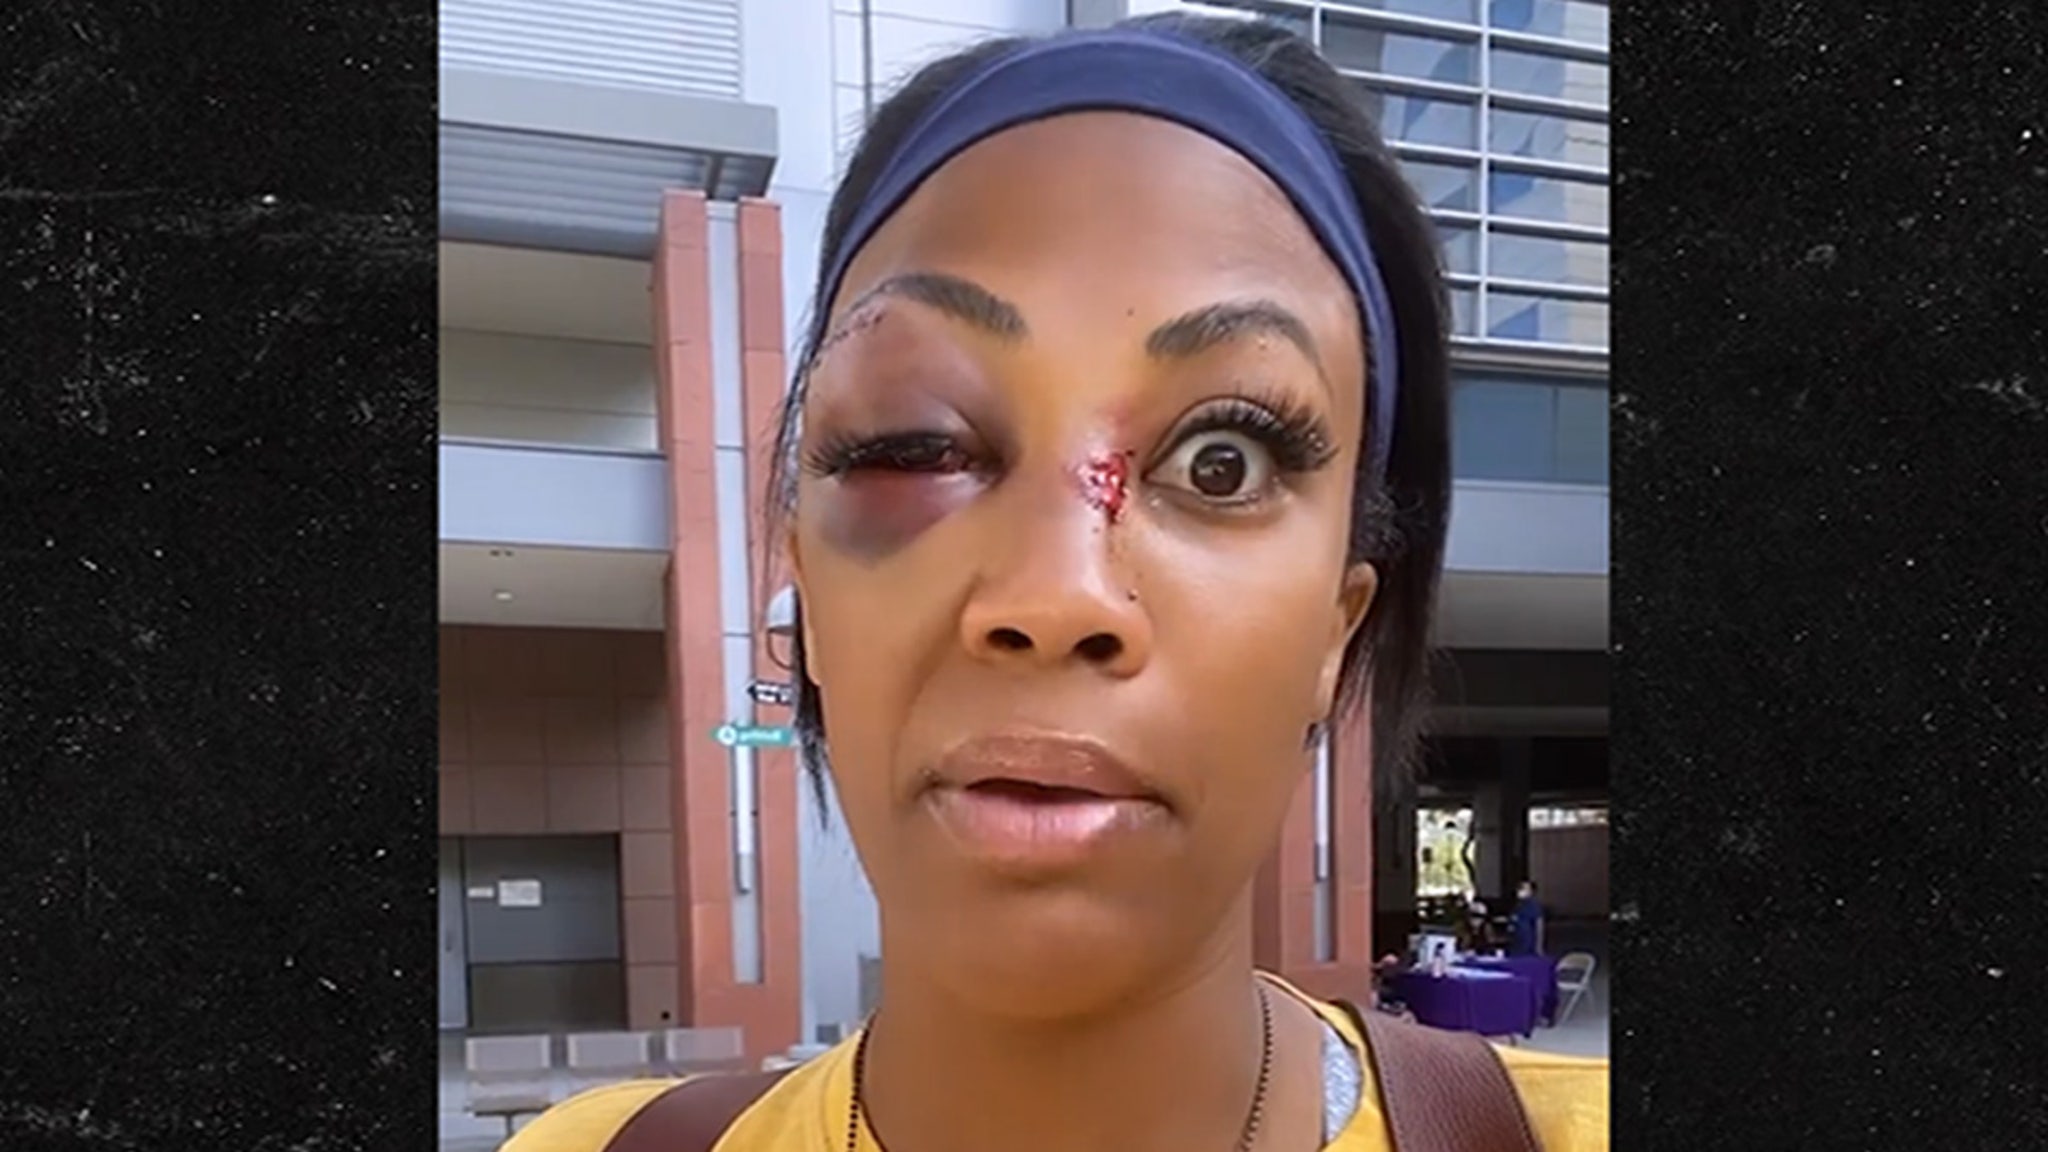 U.S. Olympian Kim Glass Attacked by Homeless Man In L.A., Gruesome Injuries